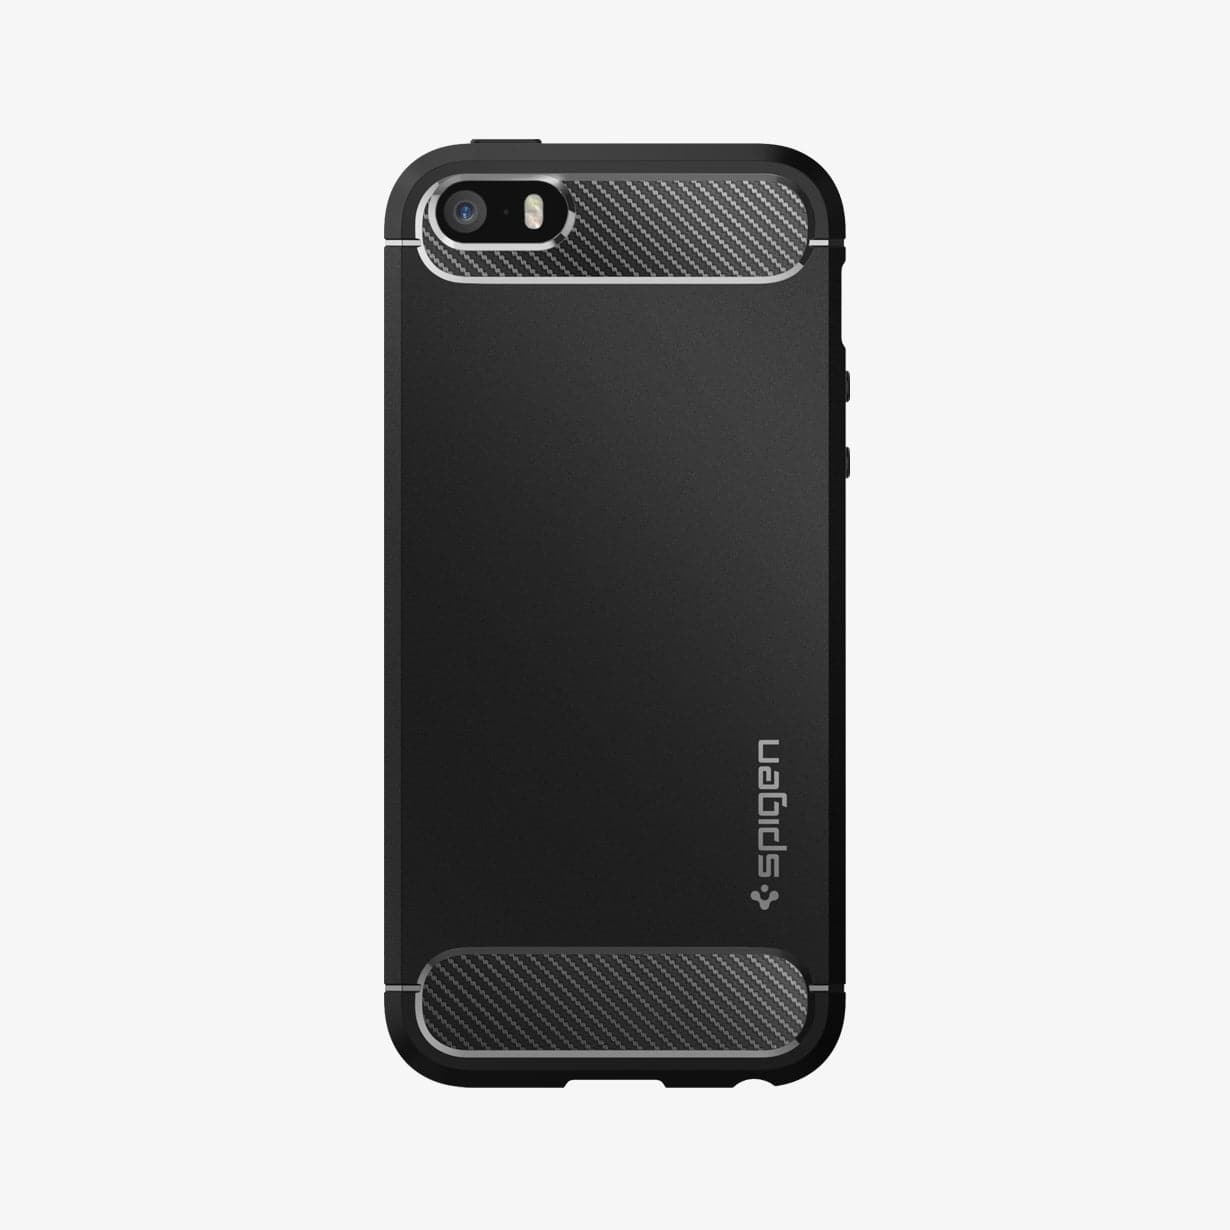 041CS20167 - iPhone 5 Series Case Rugged Armor in black showing the back